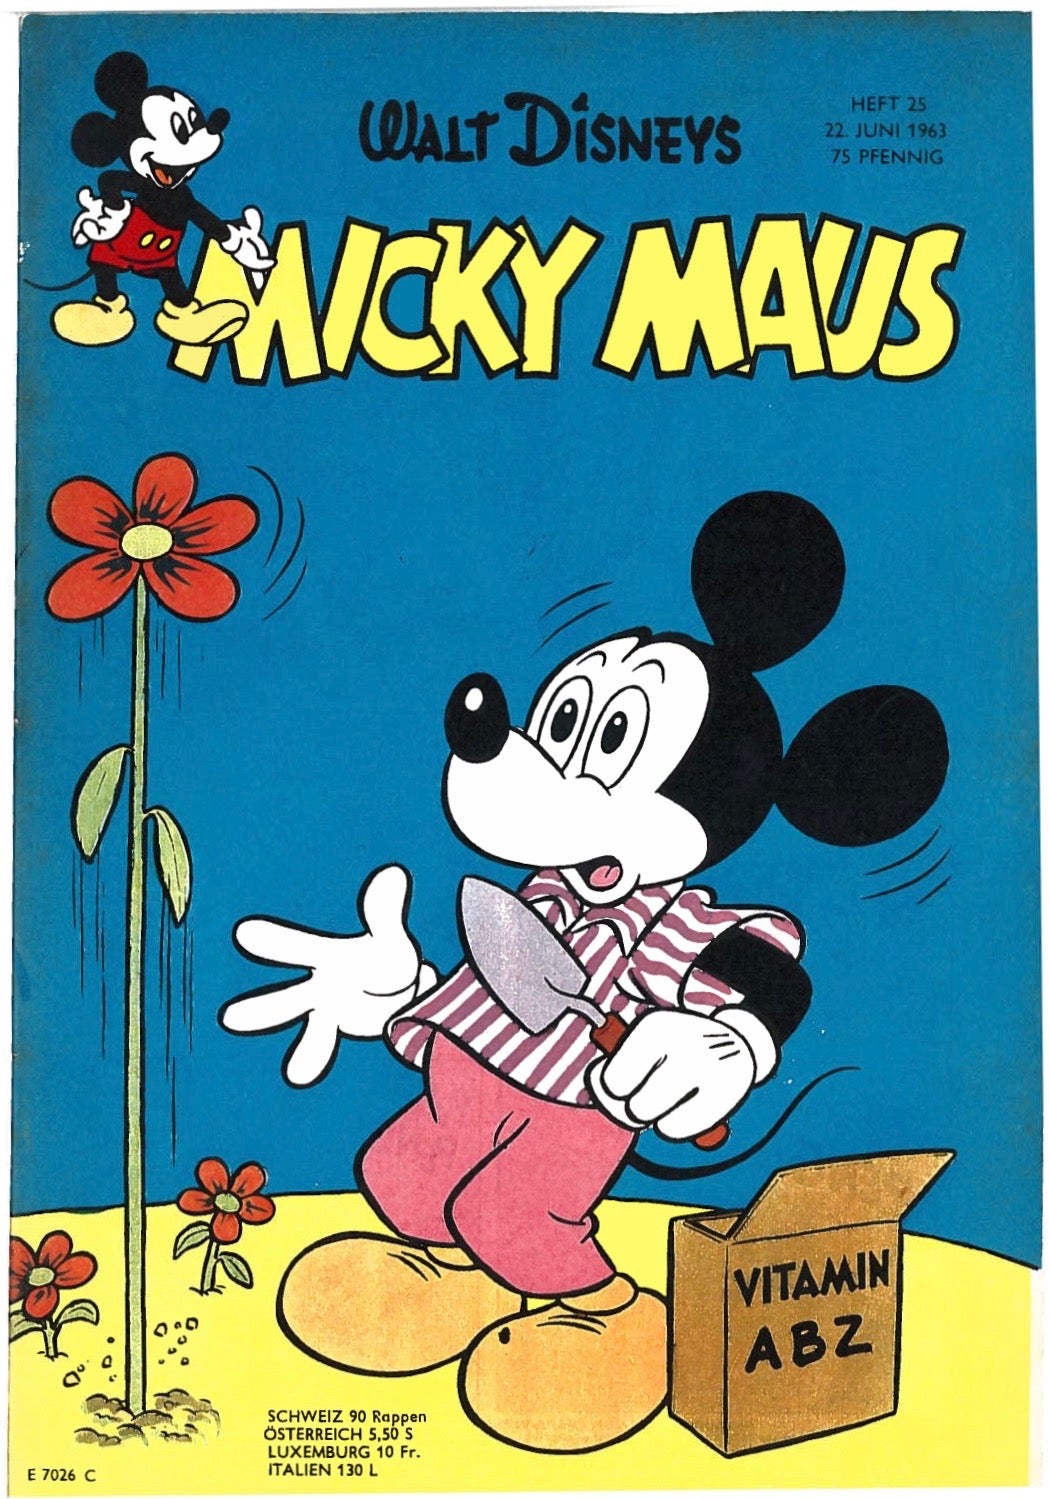 Micky Maus - 1st Edition/1st Printing by Walt Disney on Books Tell You Why,  Inc, mikimaus